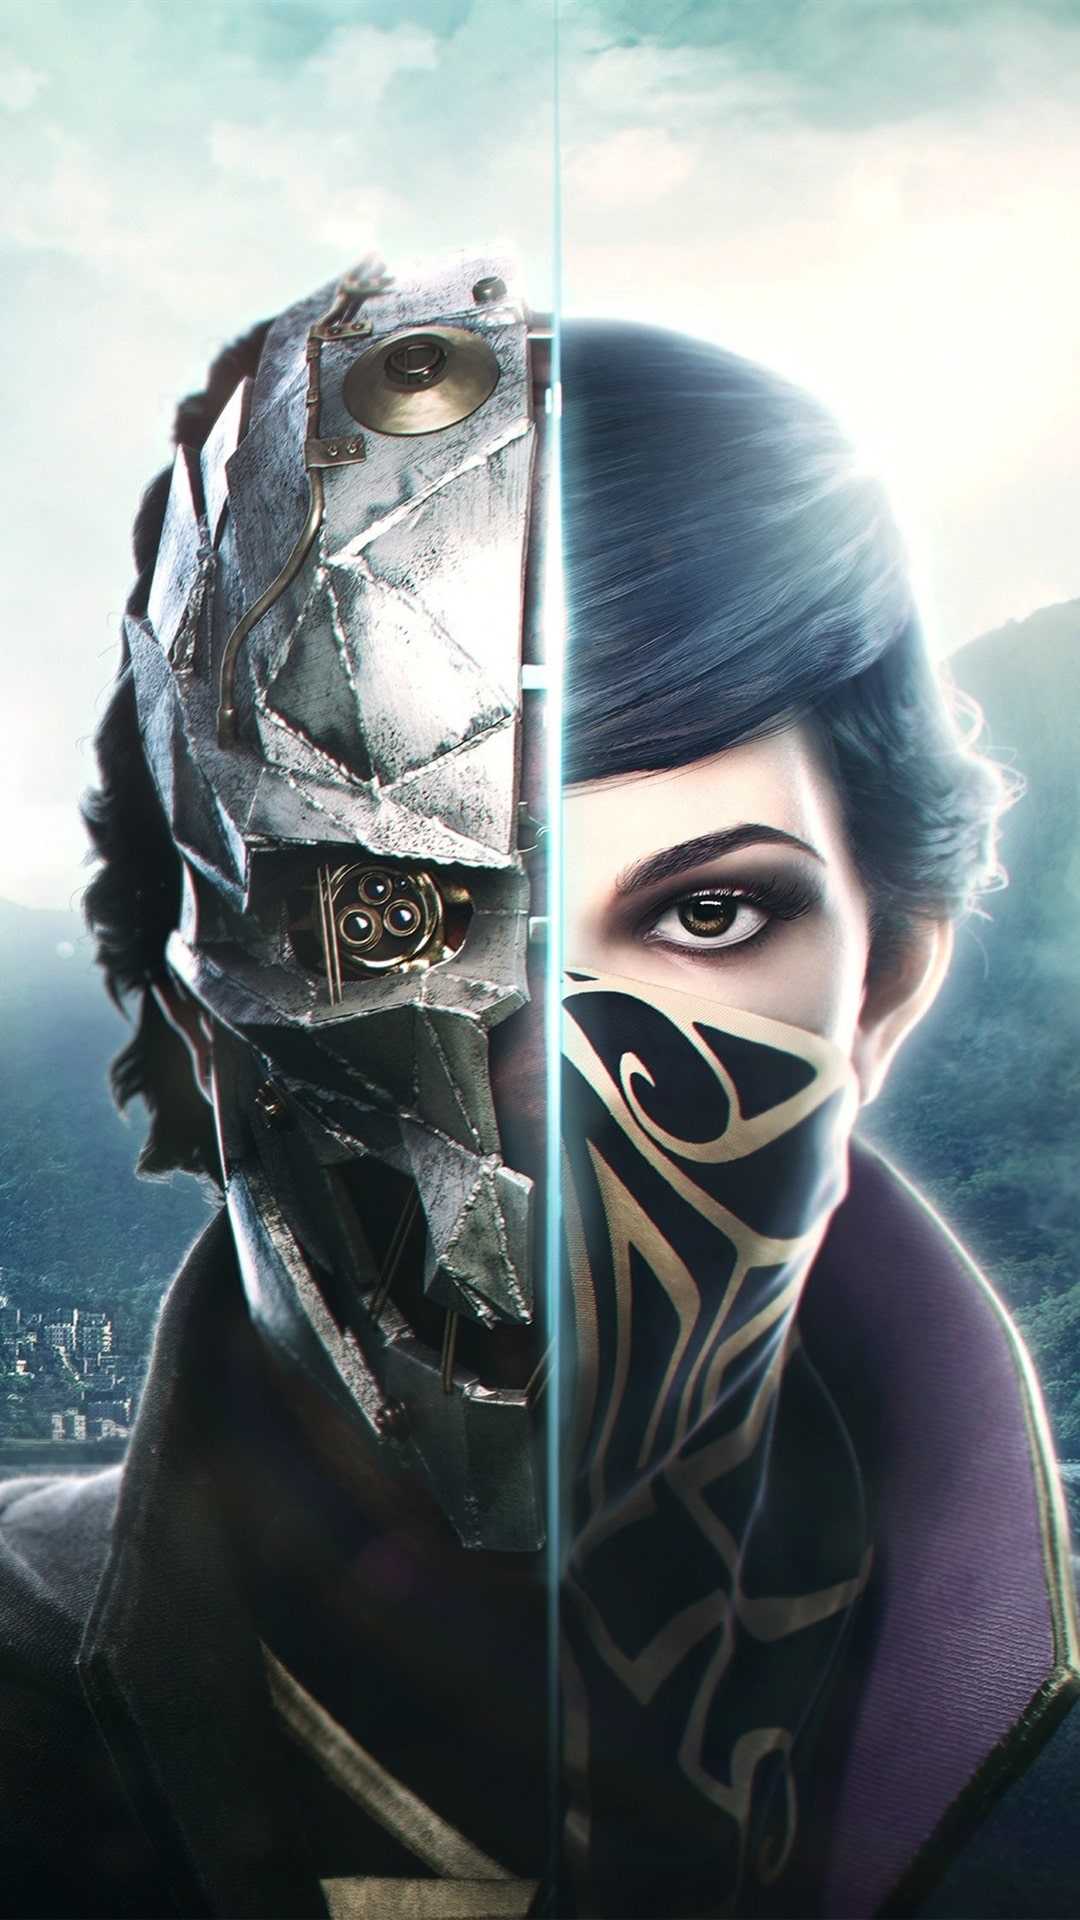 Dishonored 2 Wallpaper 1